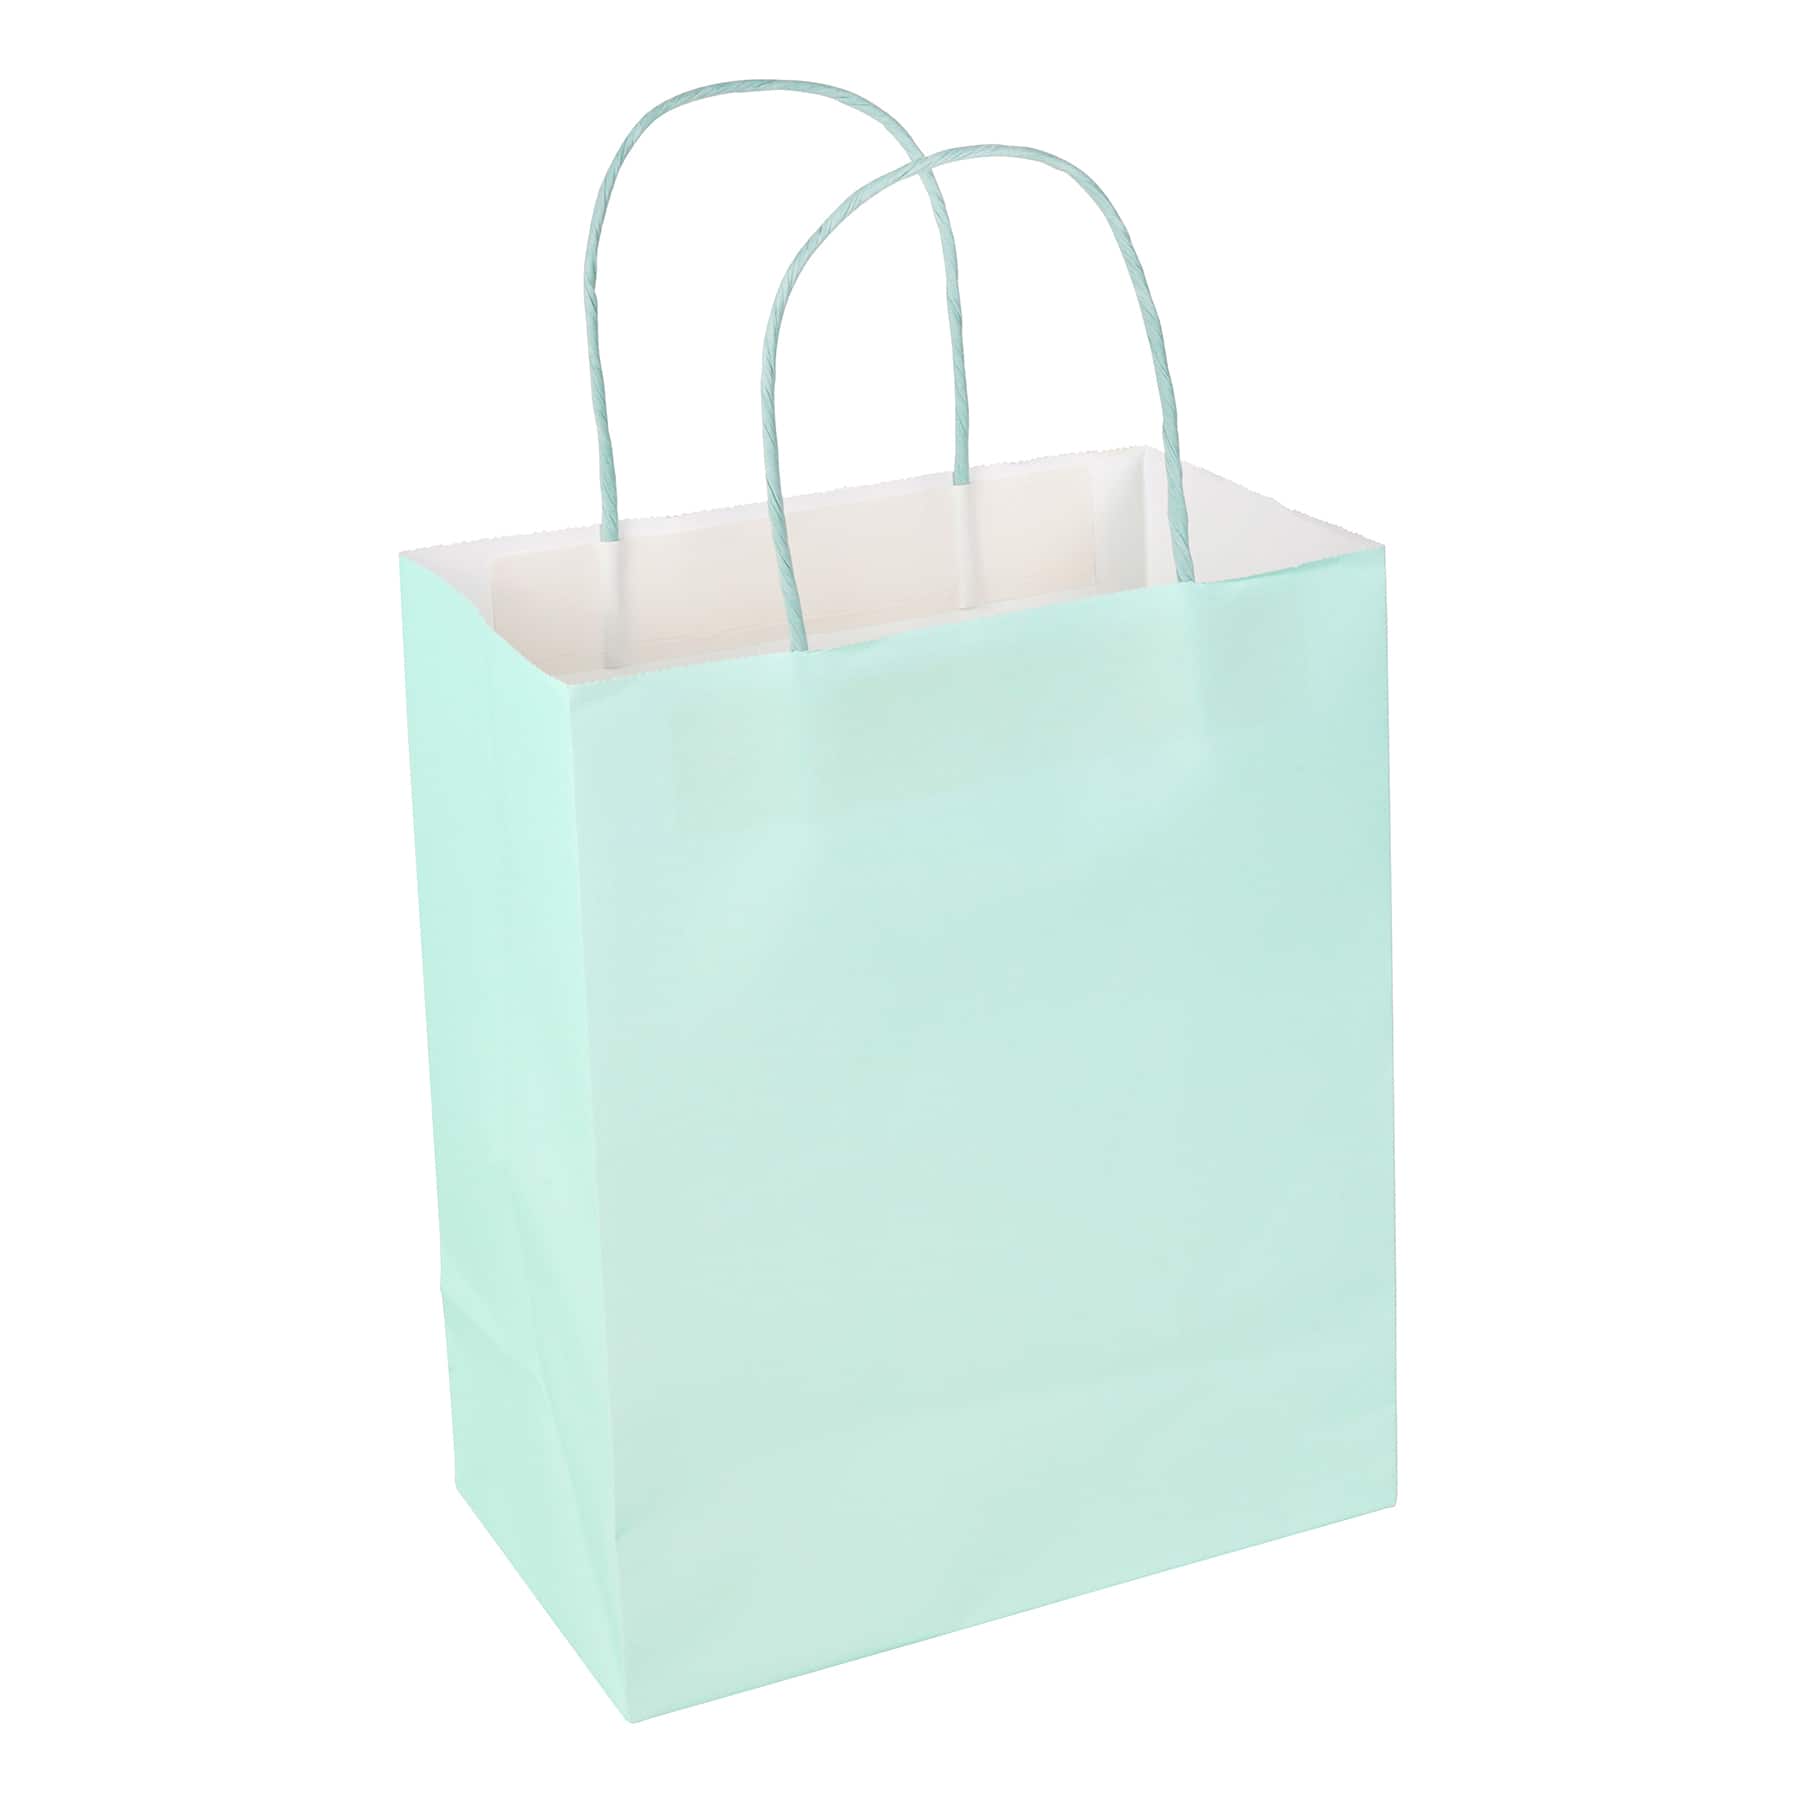 Assorted Pastel Colors Gifting Medium Bags by Celebrate It | 8 x 4.75 x 10 | Michaels